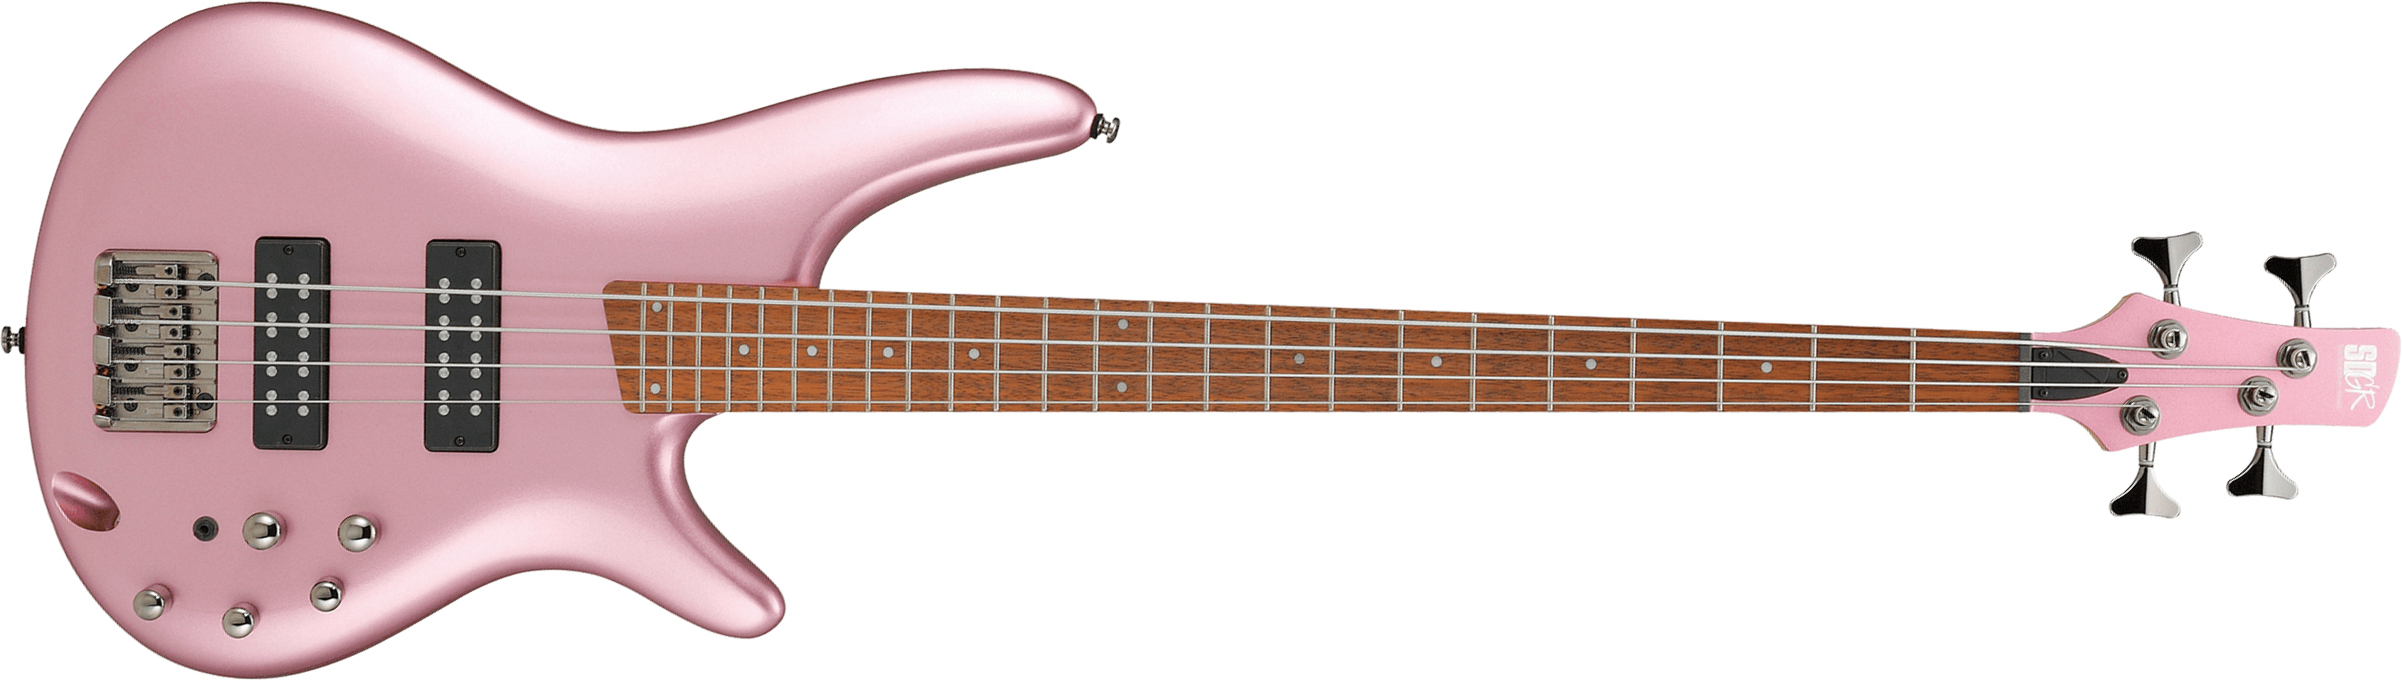 Ibanez Sr300e Pgm Standard Active Jat - Pink Gold Metallic - Solid body electric bass - Main picture